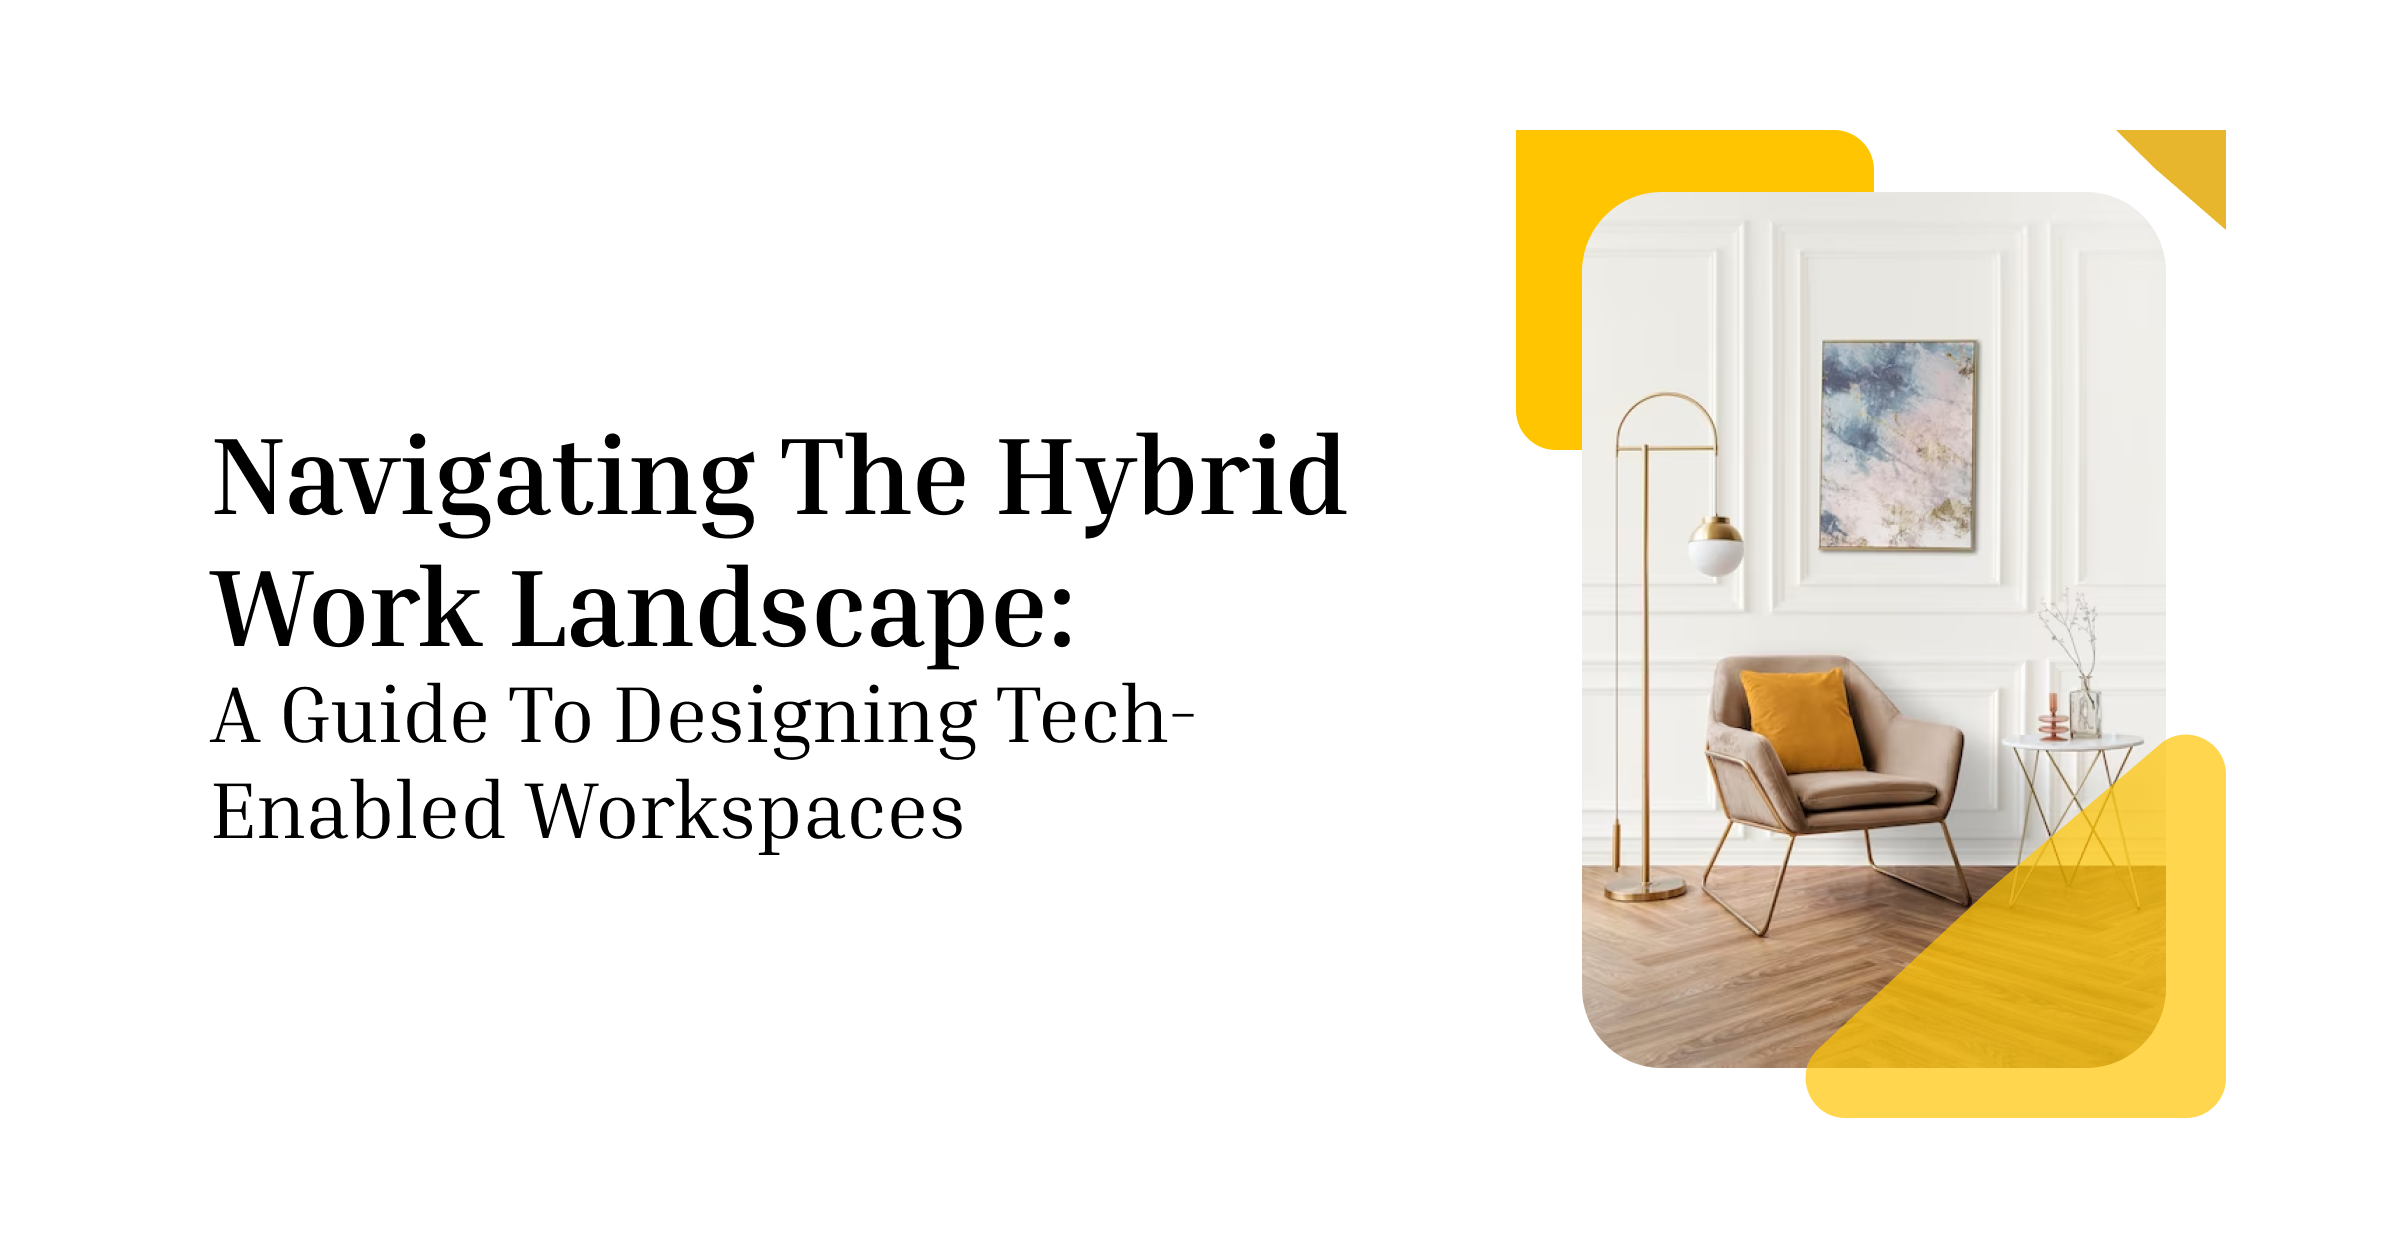 Navigating The Hybrid Work Landscape: A Guide To Designing Tech-Enabled Workspaces